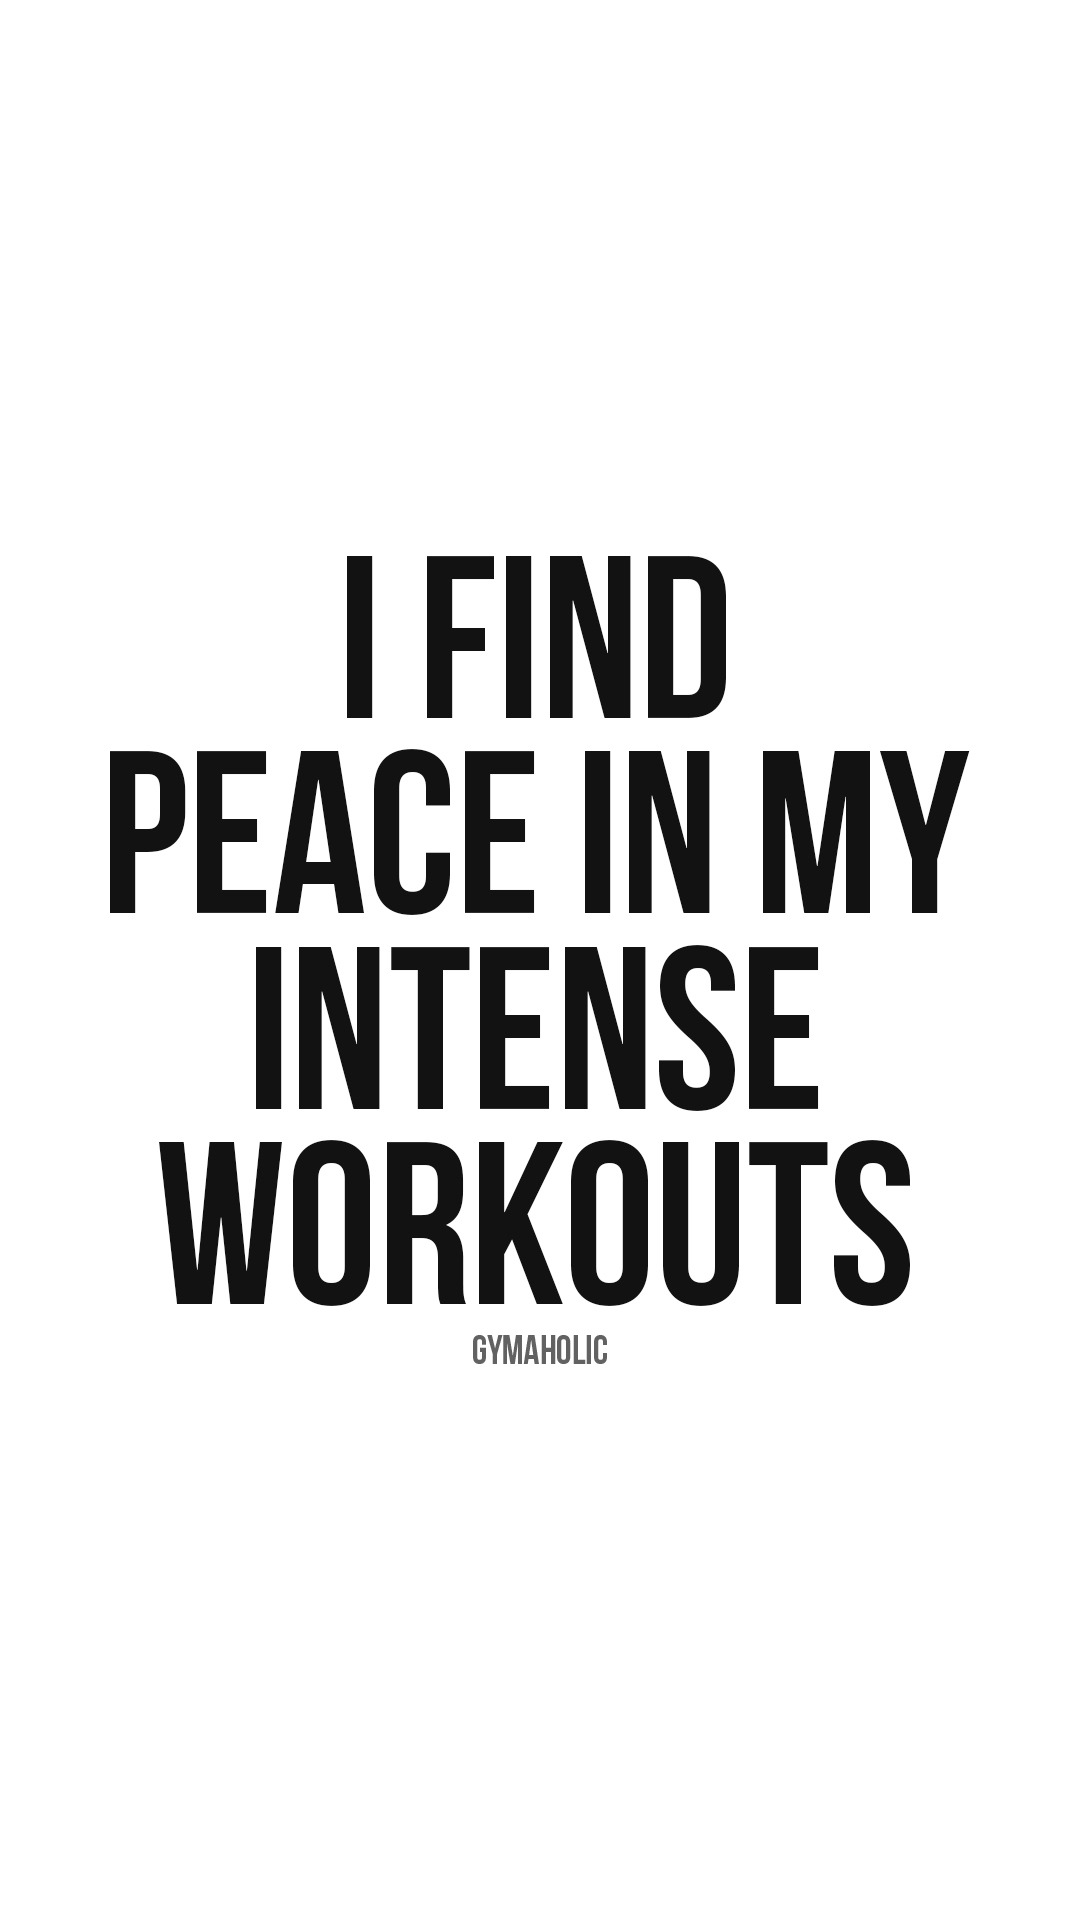 I find peace in my intense workouts